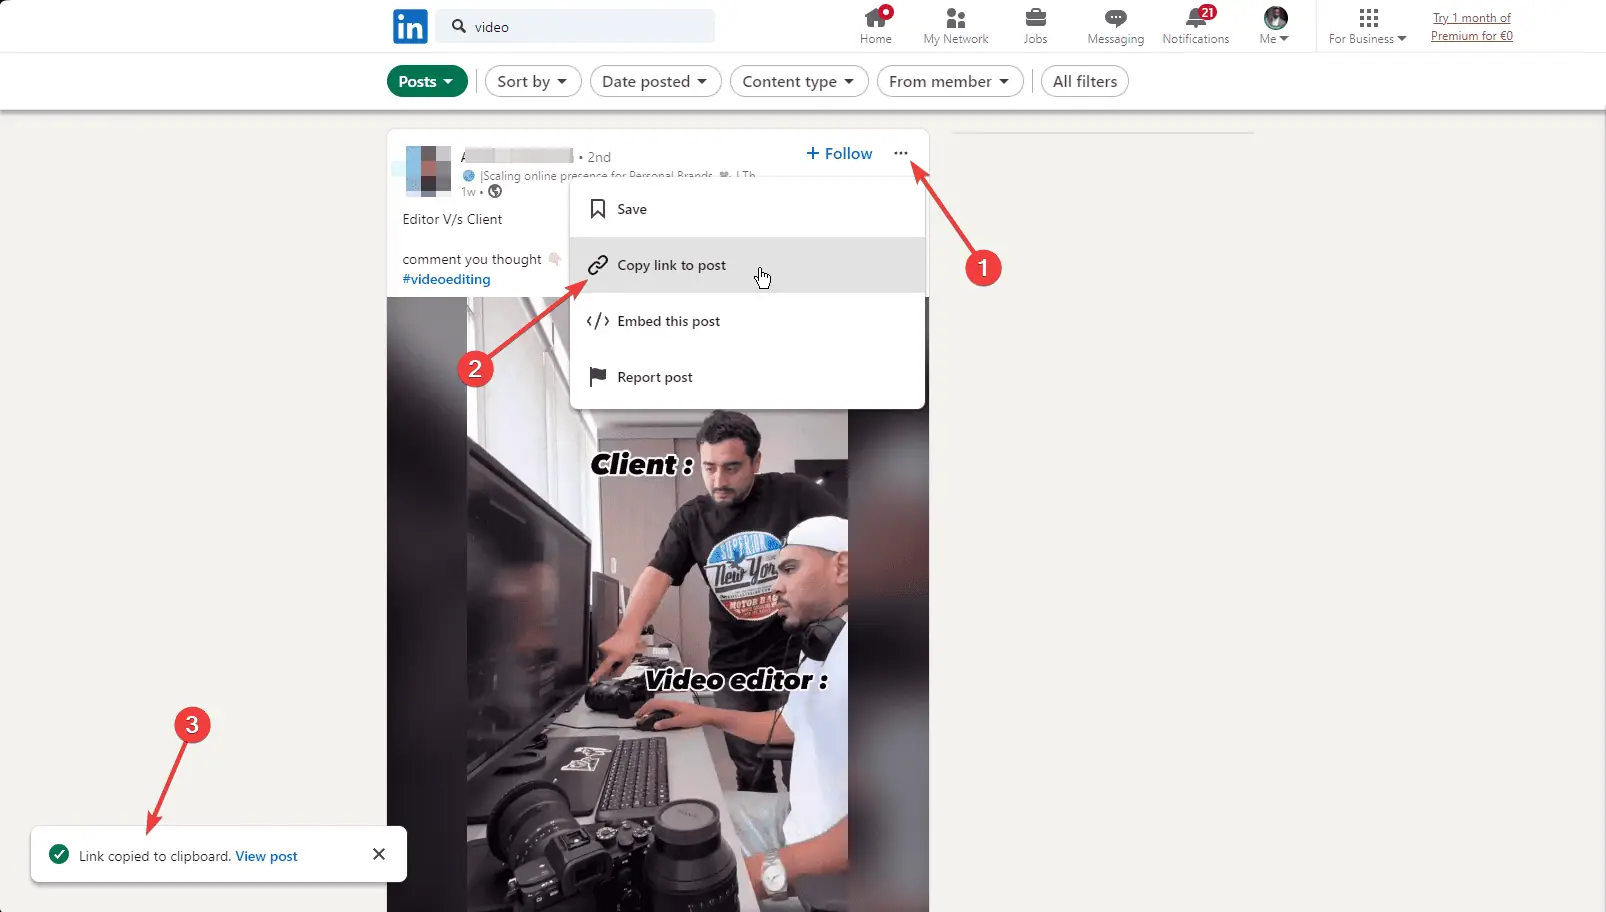 Copying video link from LinkedIn